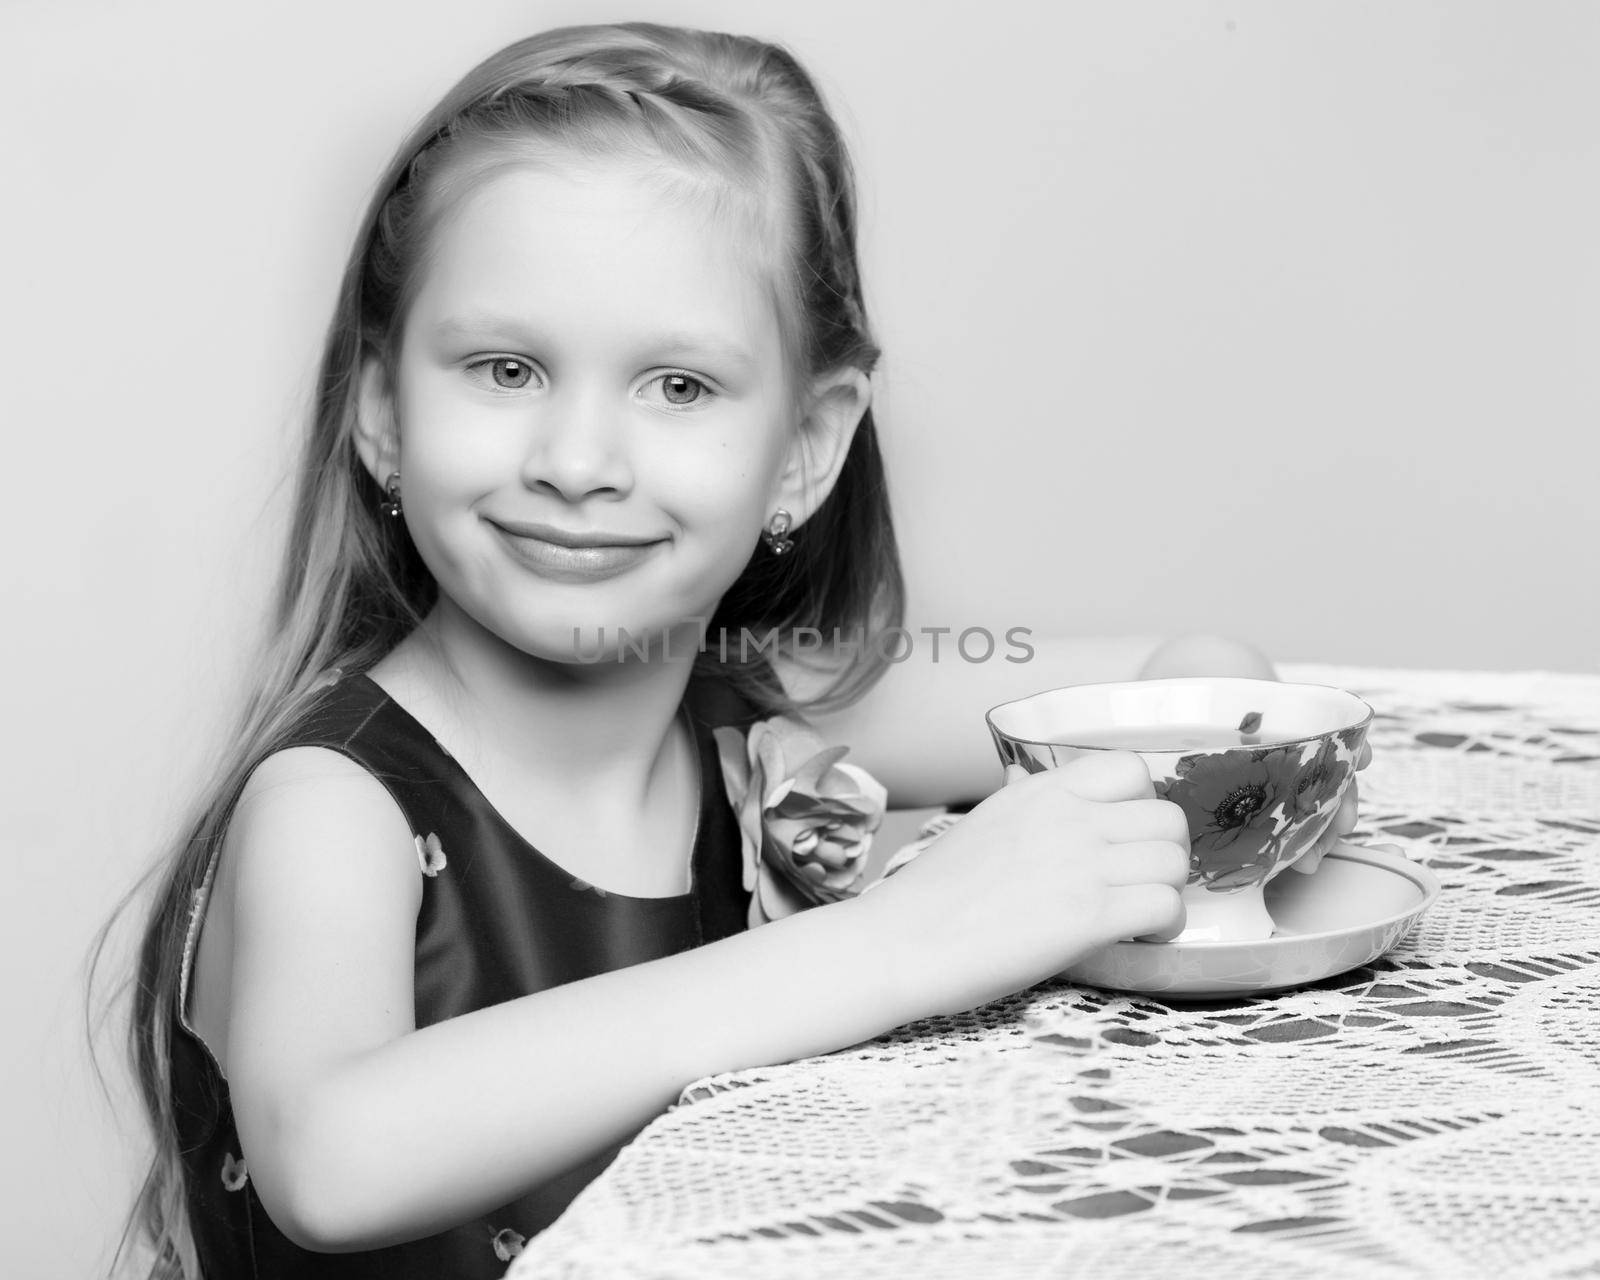 A beautiful little girl with long blond hair sitting at a table and drinking tea.Black and white photography.